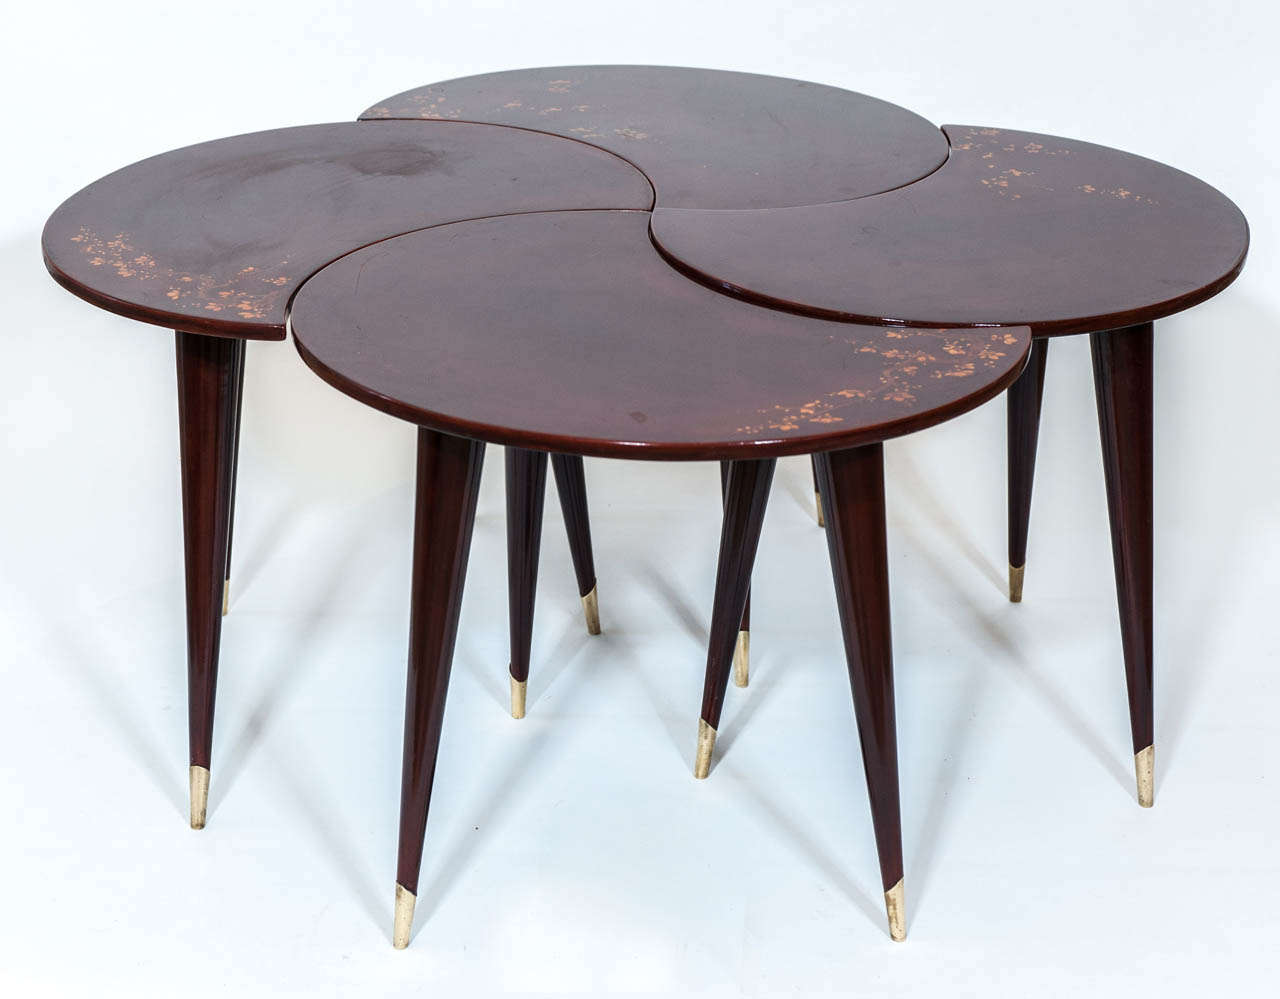 A fabulous and unique multi- tabled cocktail table with
gold floral decoration. The heavily lacquered table is a deep bergundy red
and has polished brass feet.